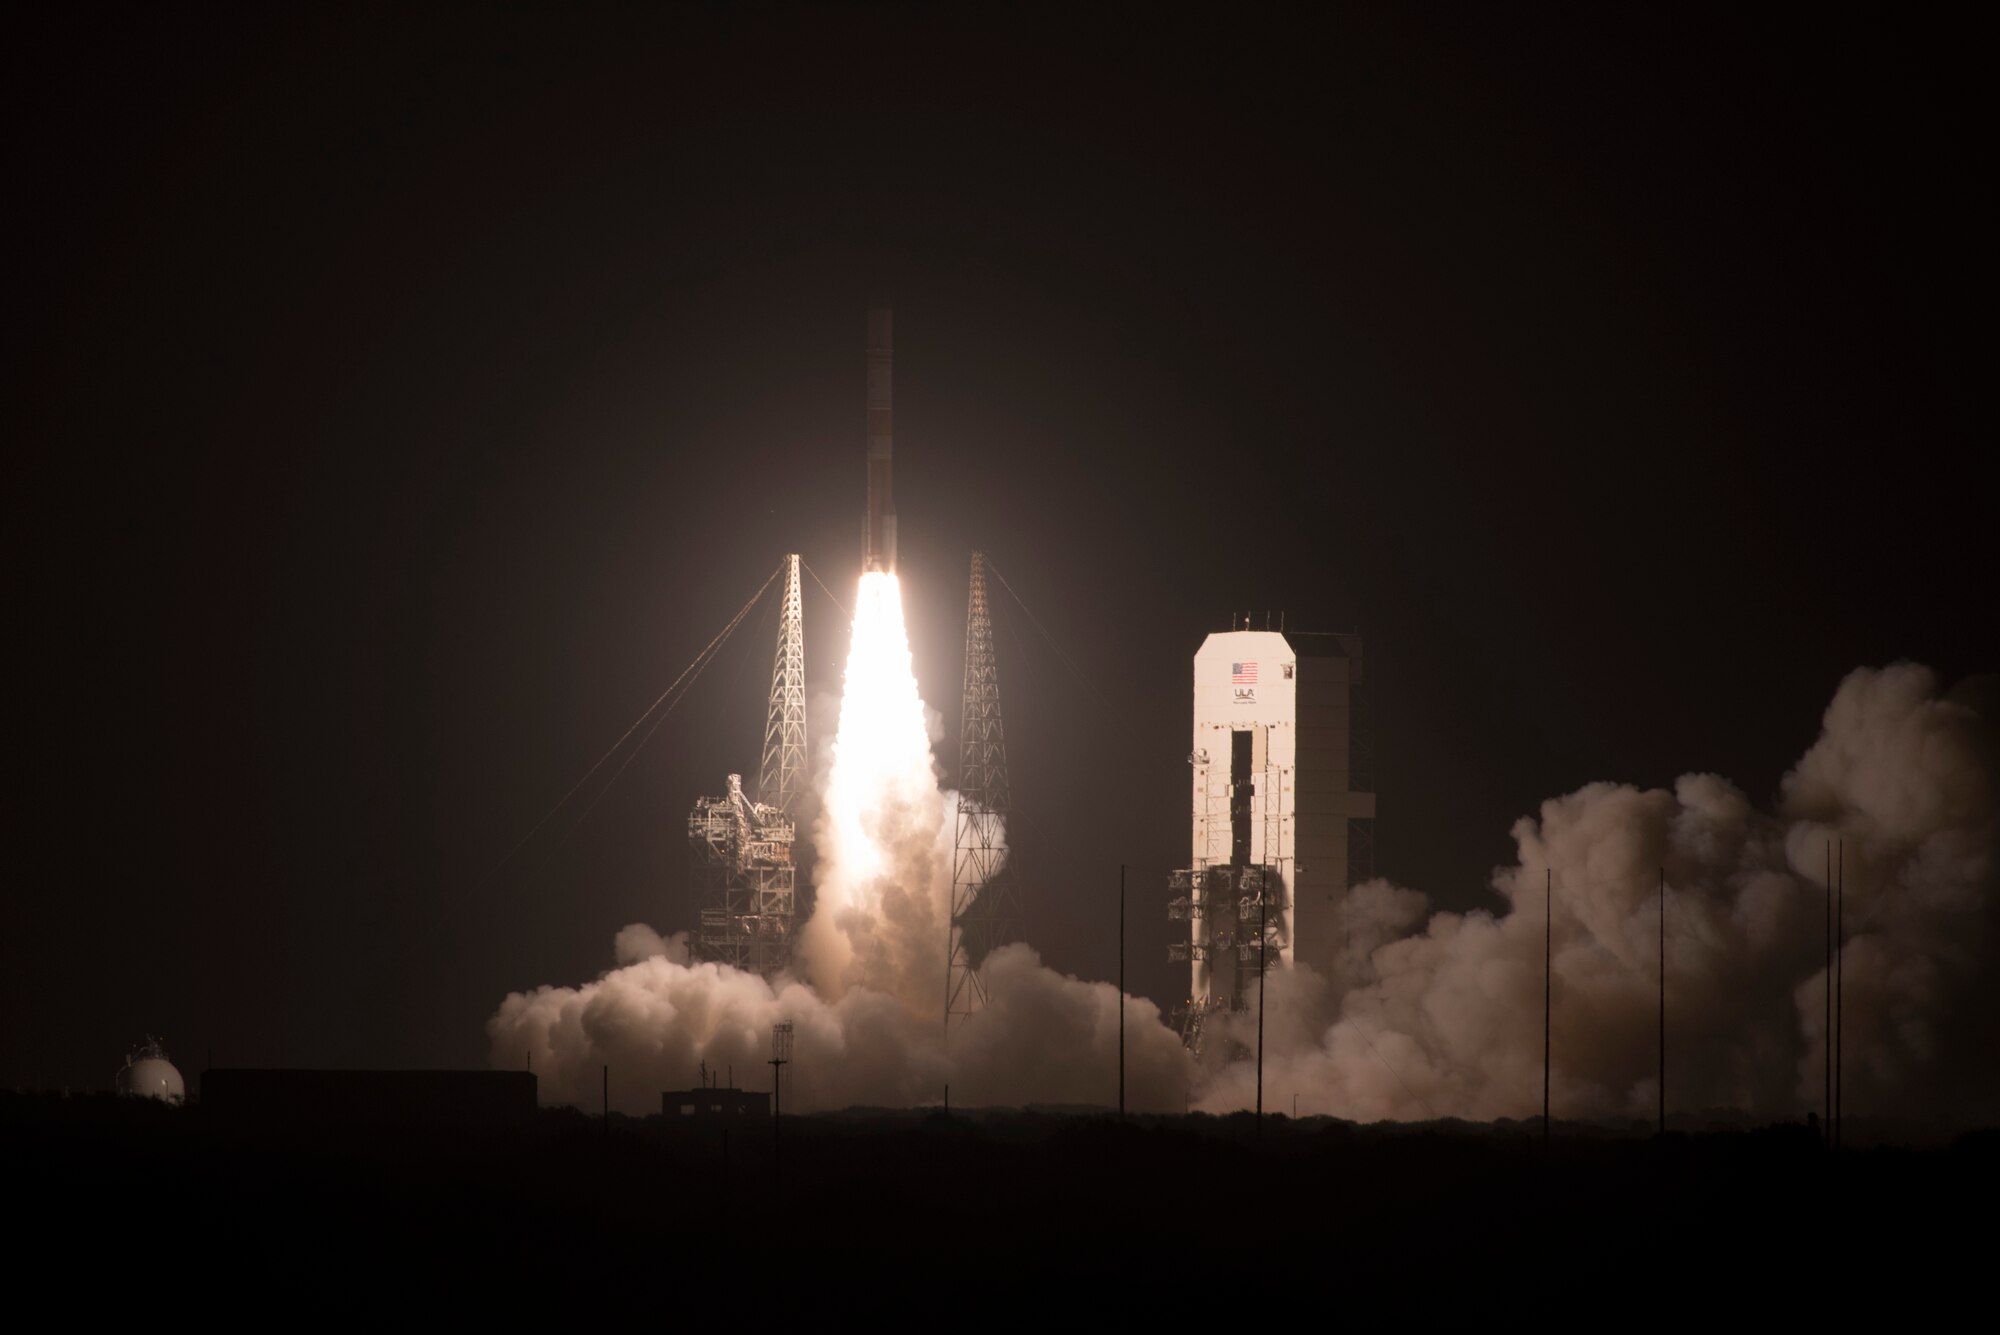 The United Launch Alliance’s Delta IV rocket launches